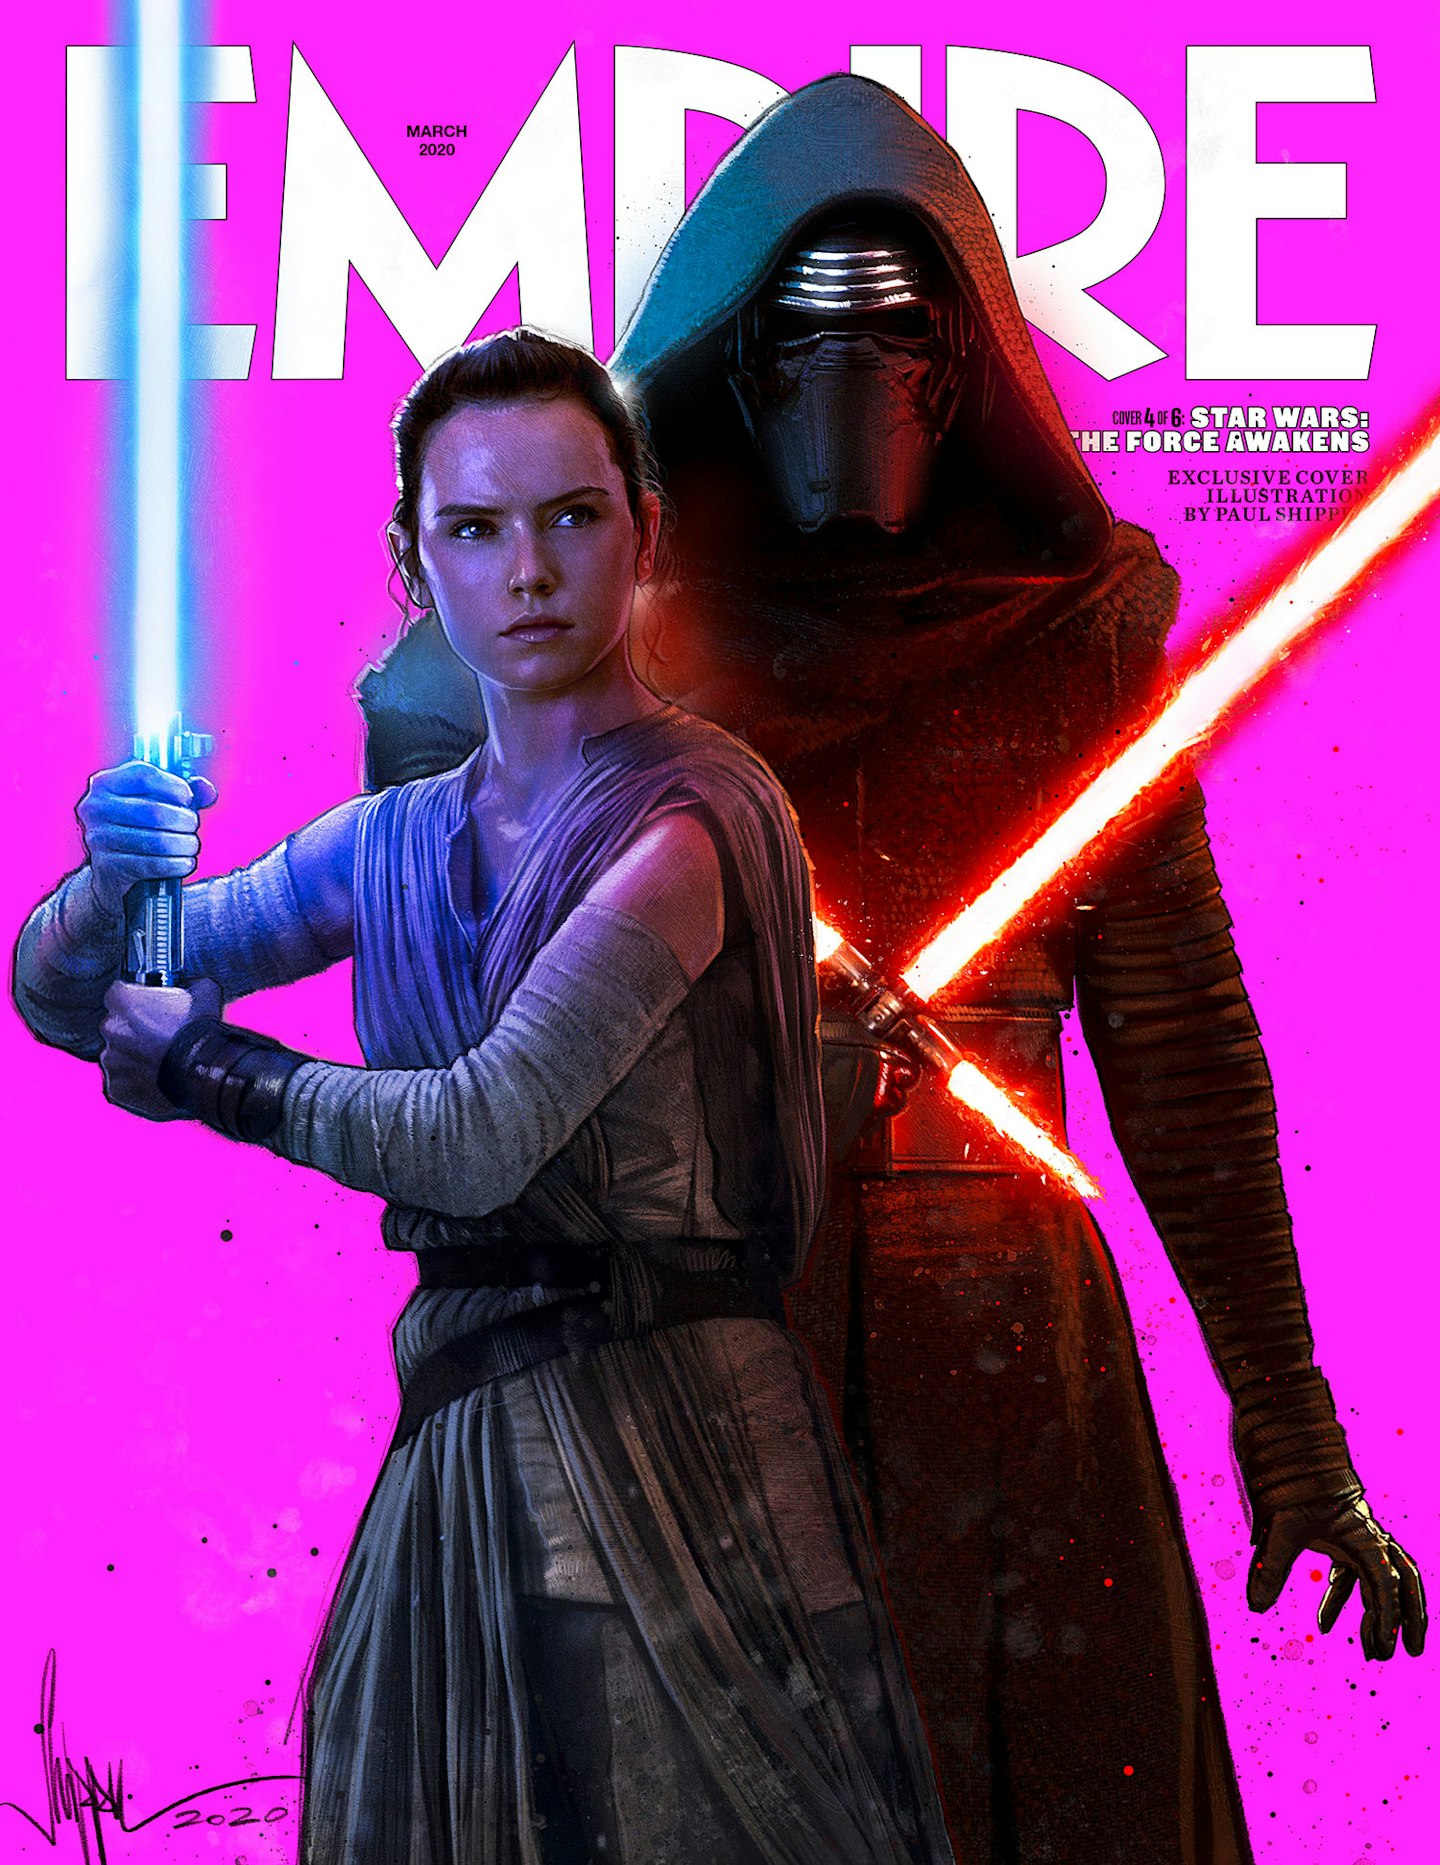 Empire – March 2020 covers